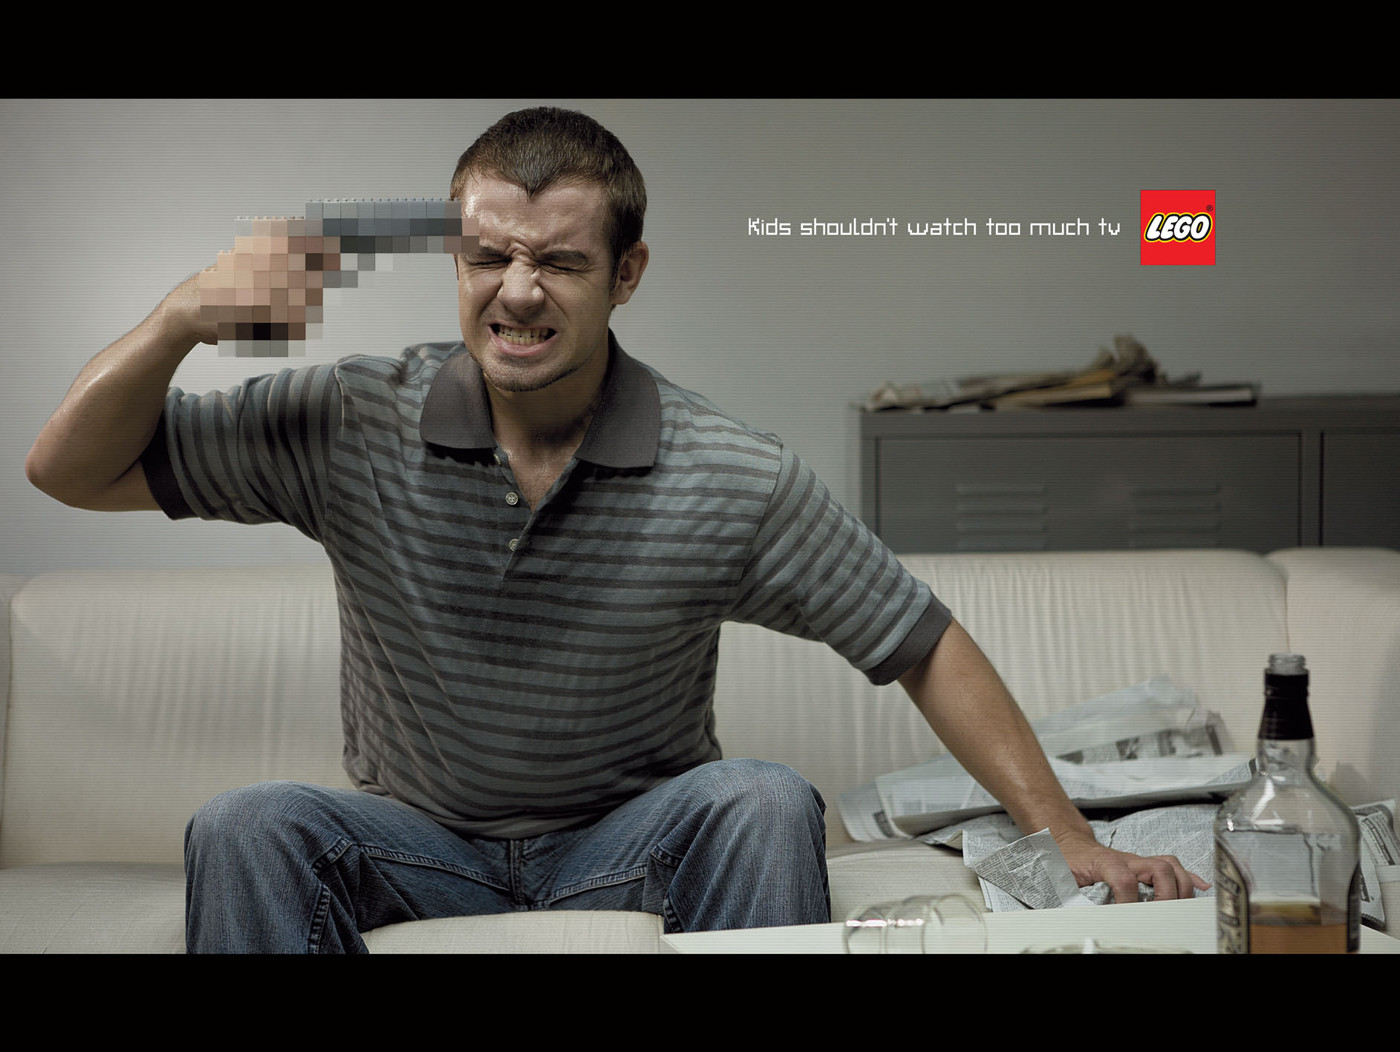 Lego advertisement of someone holding a gun to their head.